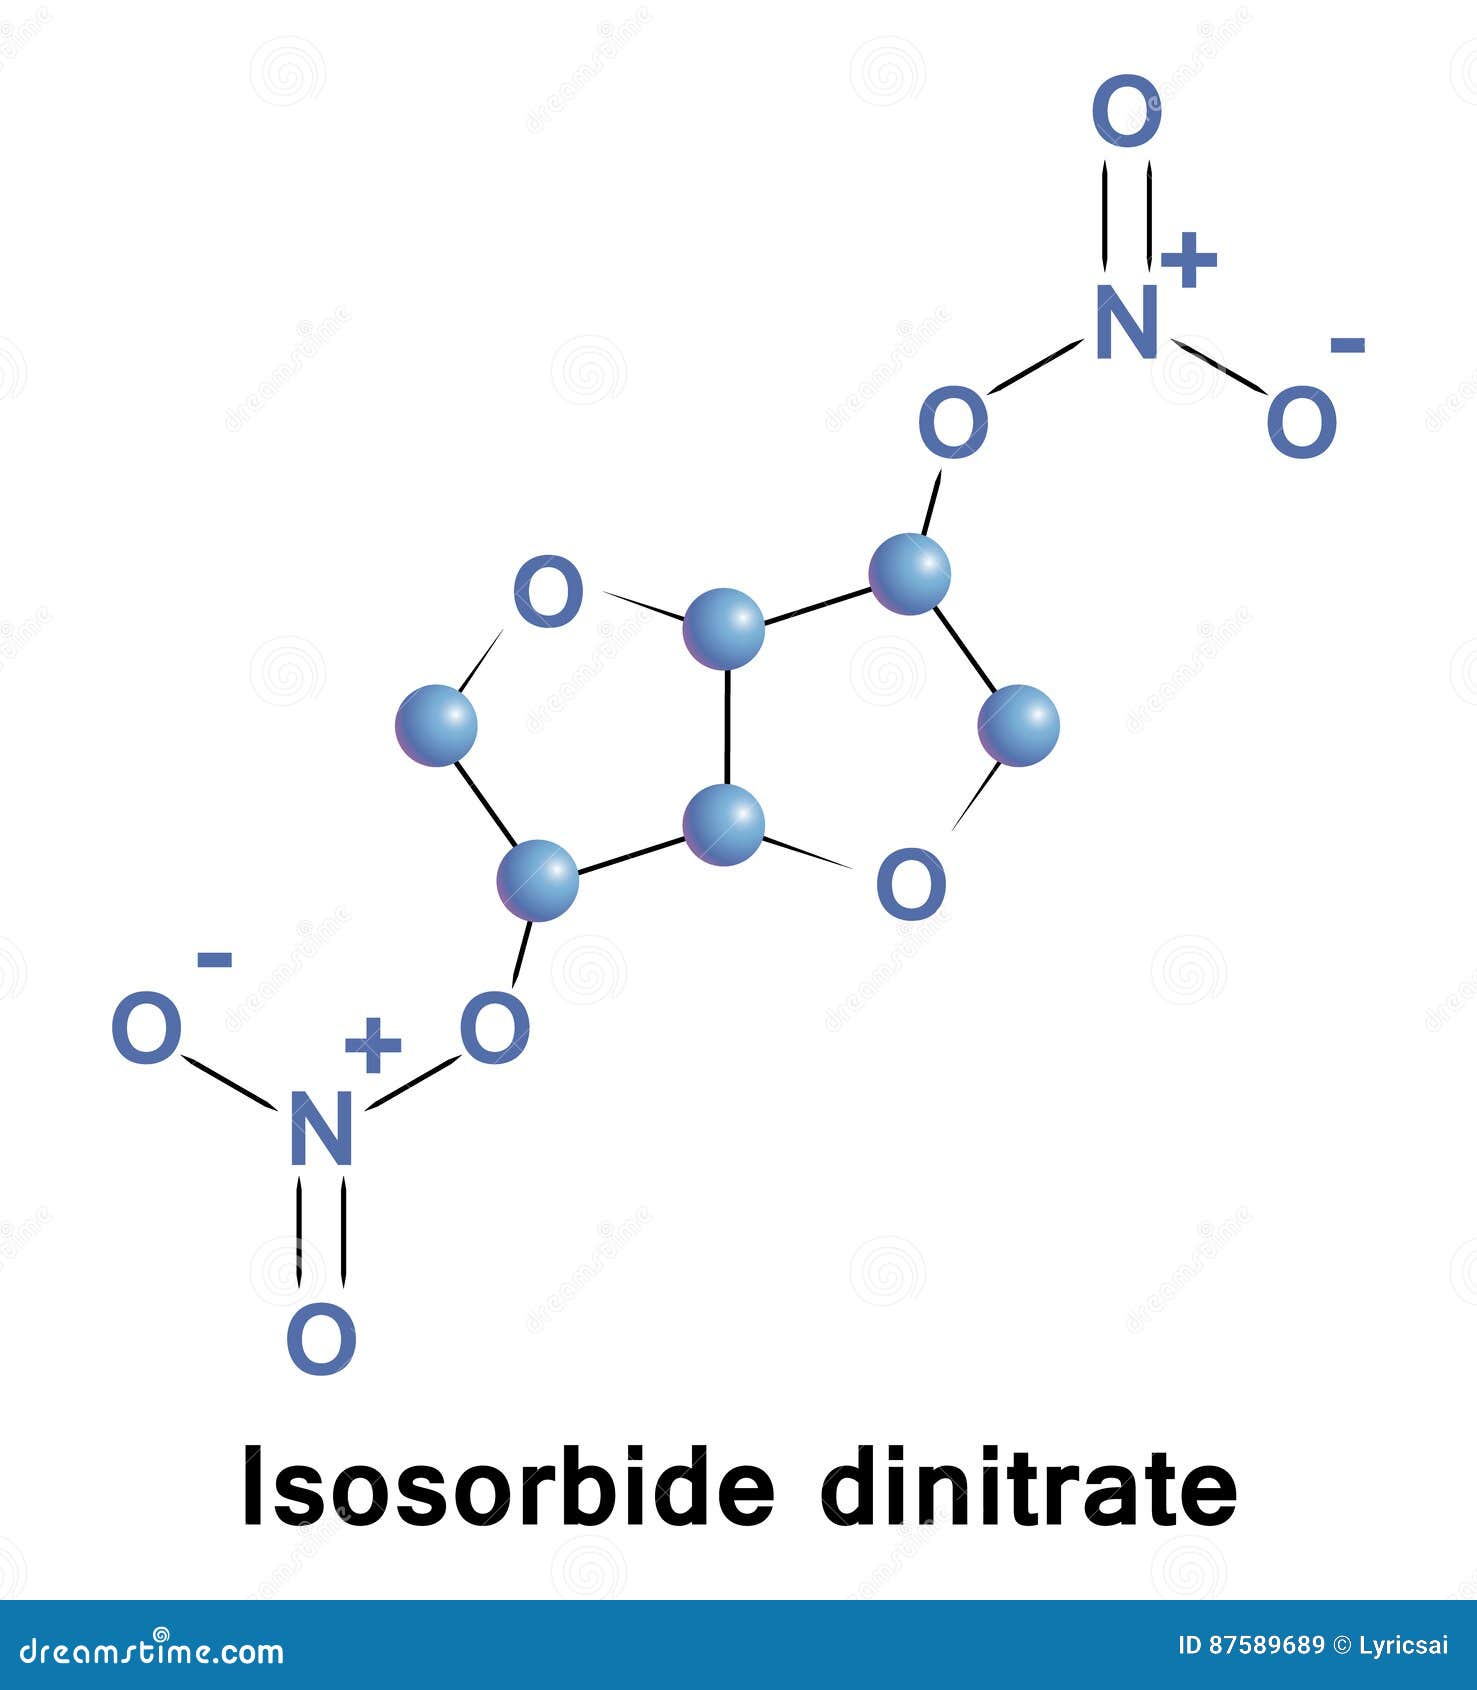 does isosorbide dinitrate lower heart rate